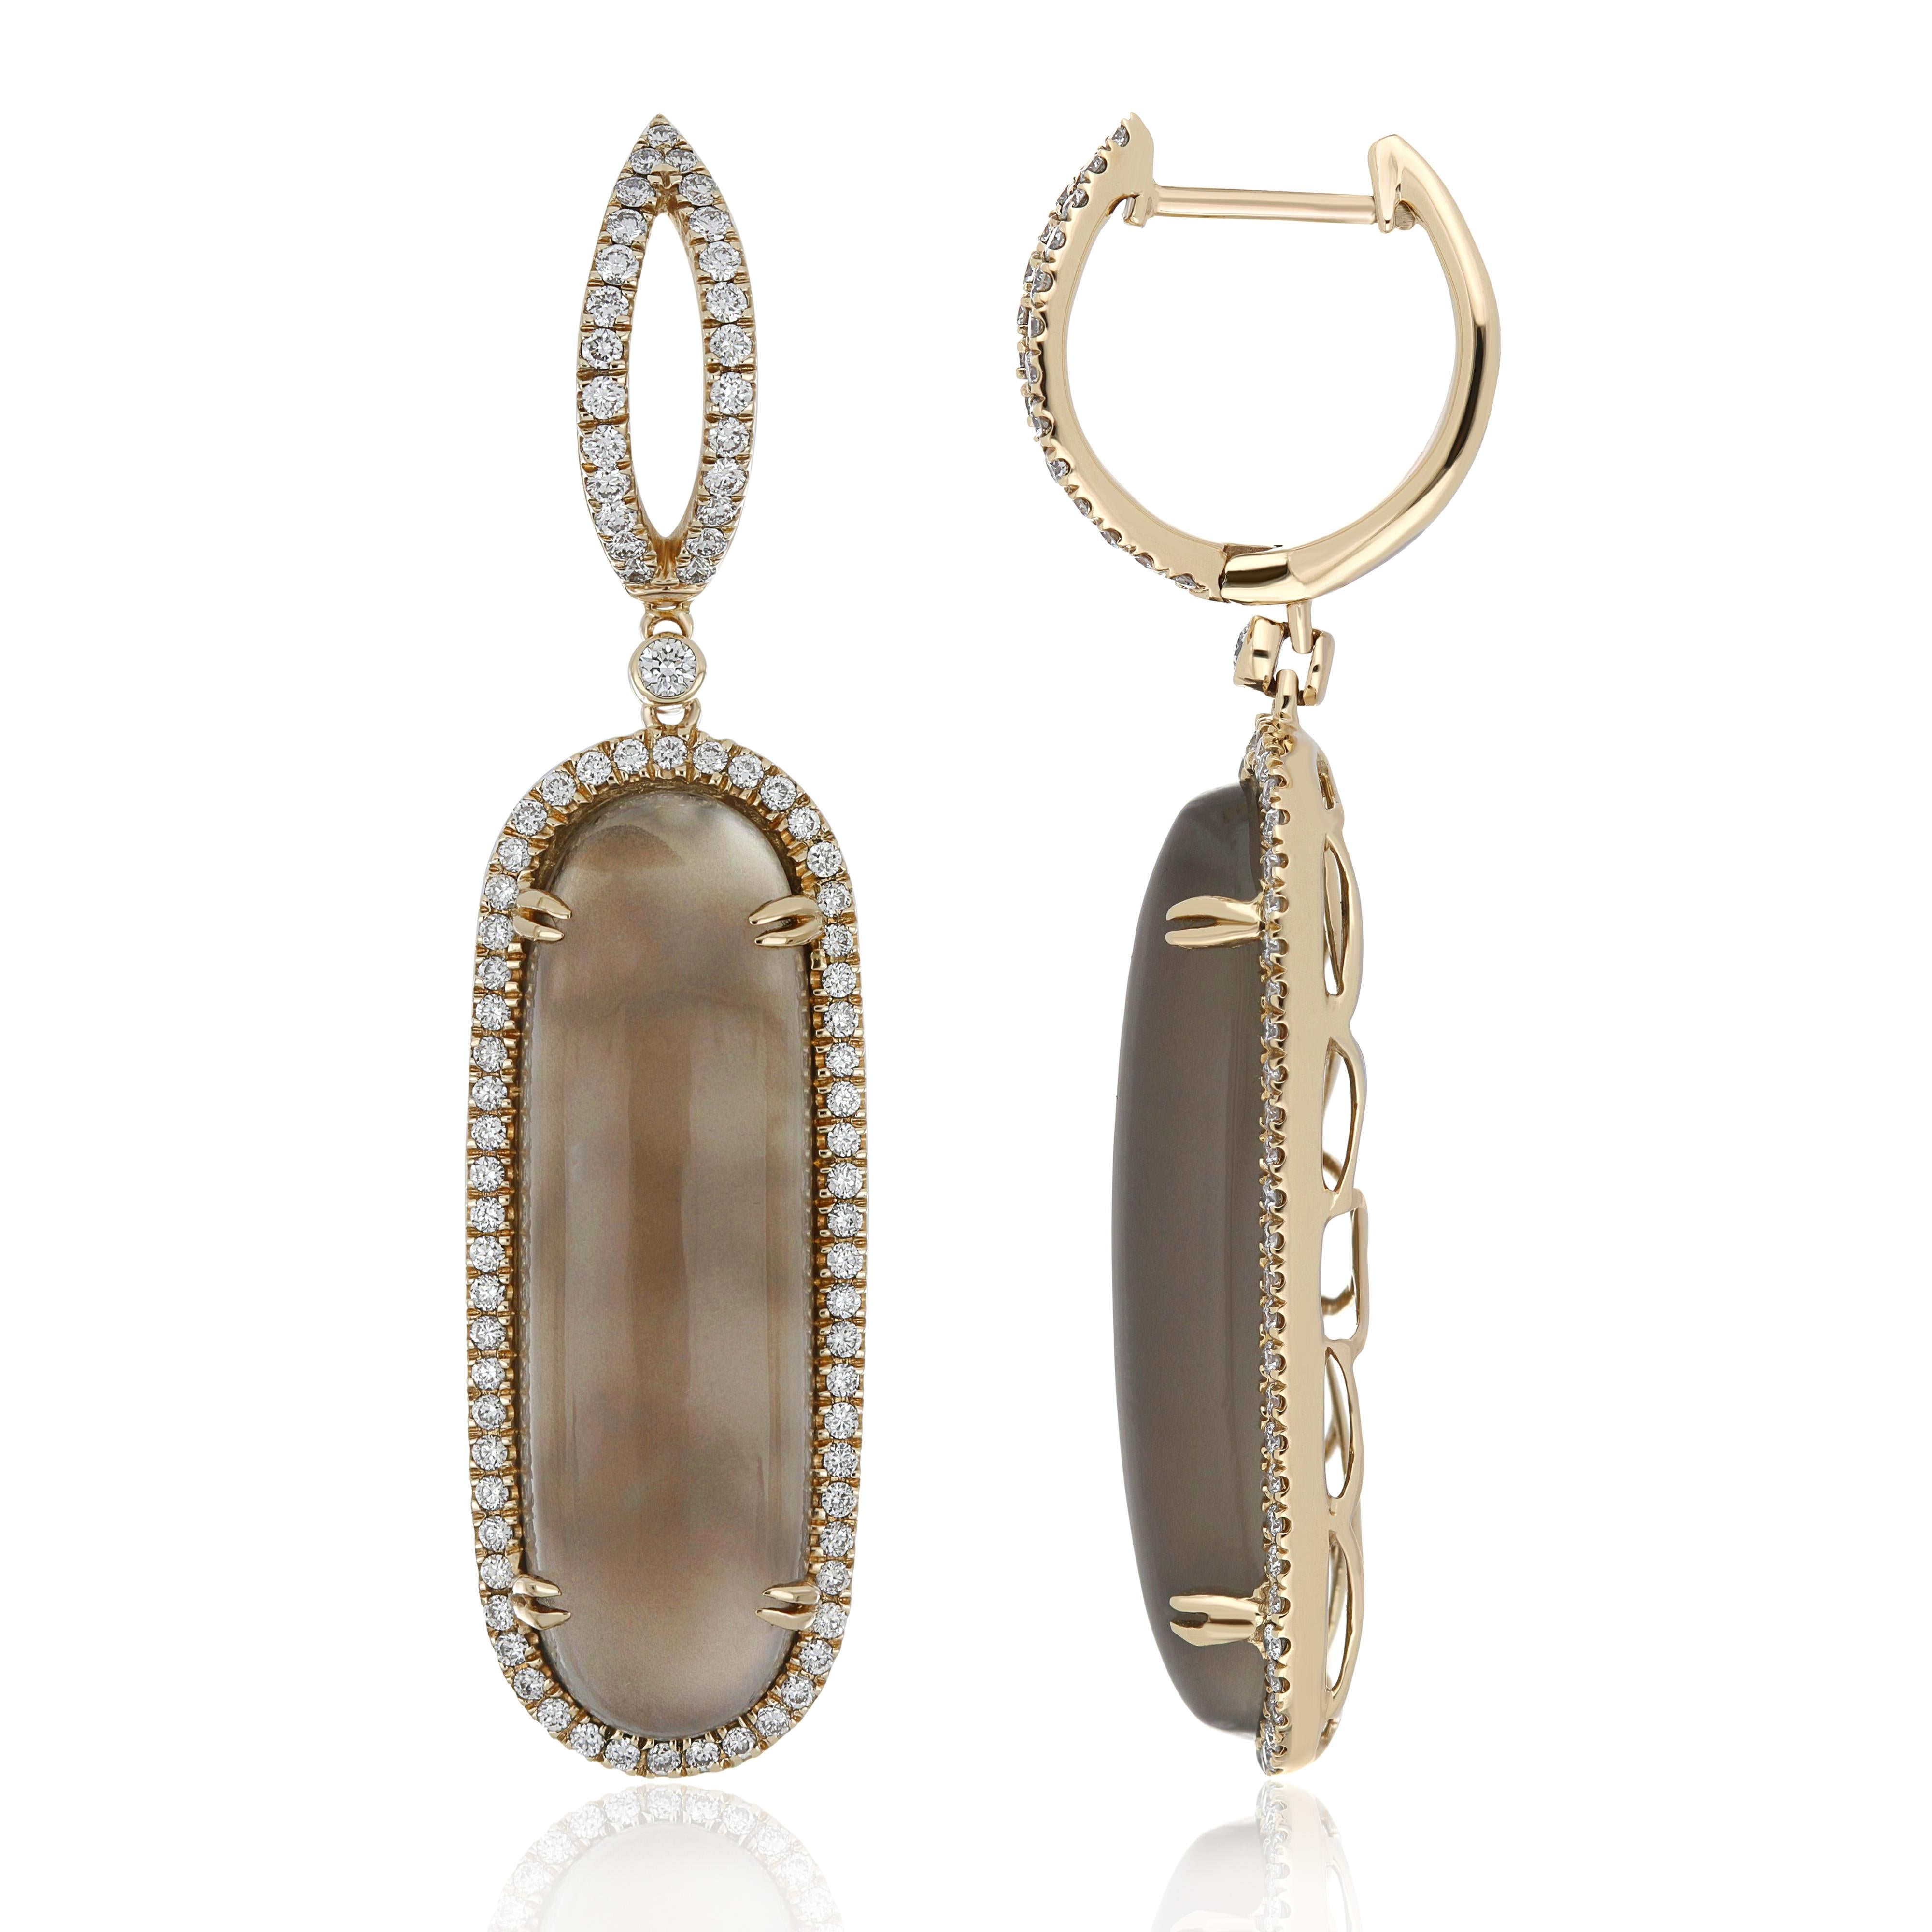 Elegant and exquisitely detailed Gold Earring center set with 13.65 Ct  Fancy Oval Cabochon Grey Moon Stone surrounded with micro pave Diamonds, weighing approx. 0.78 Cts total carat weight. Beautifully Hand crafted in 14 Karat  Yellow Gold.


Stone